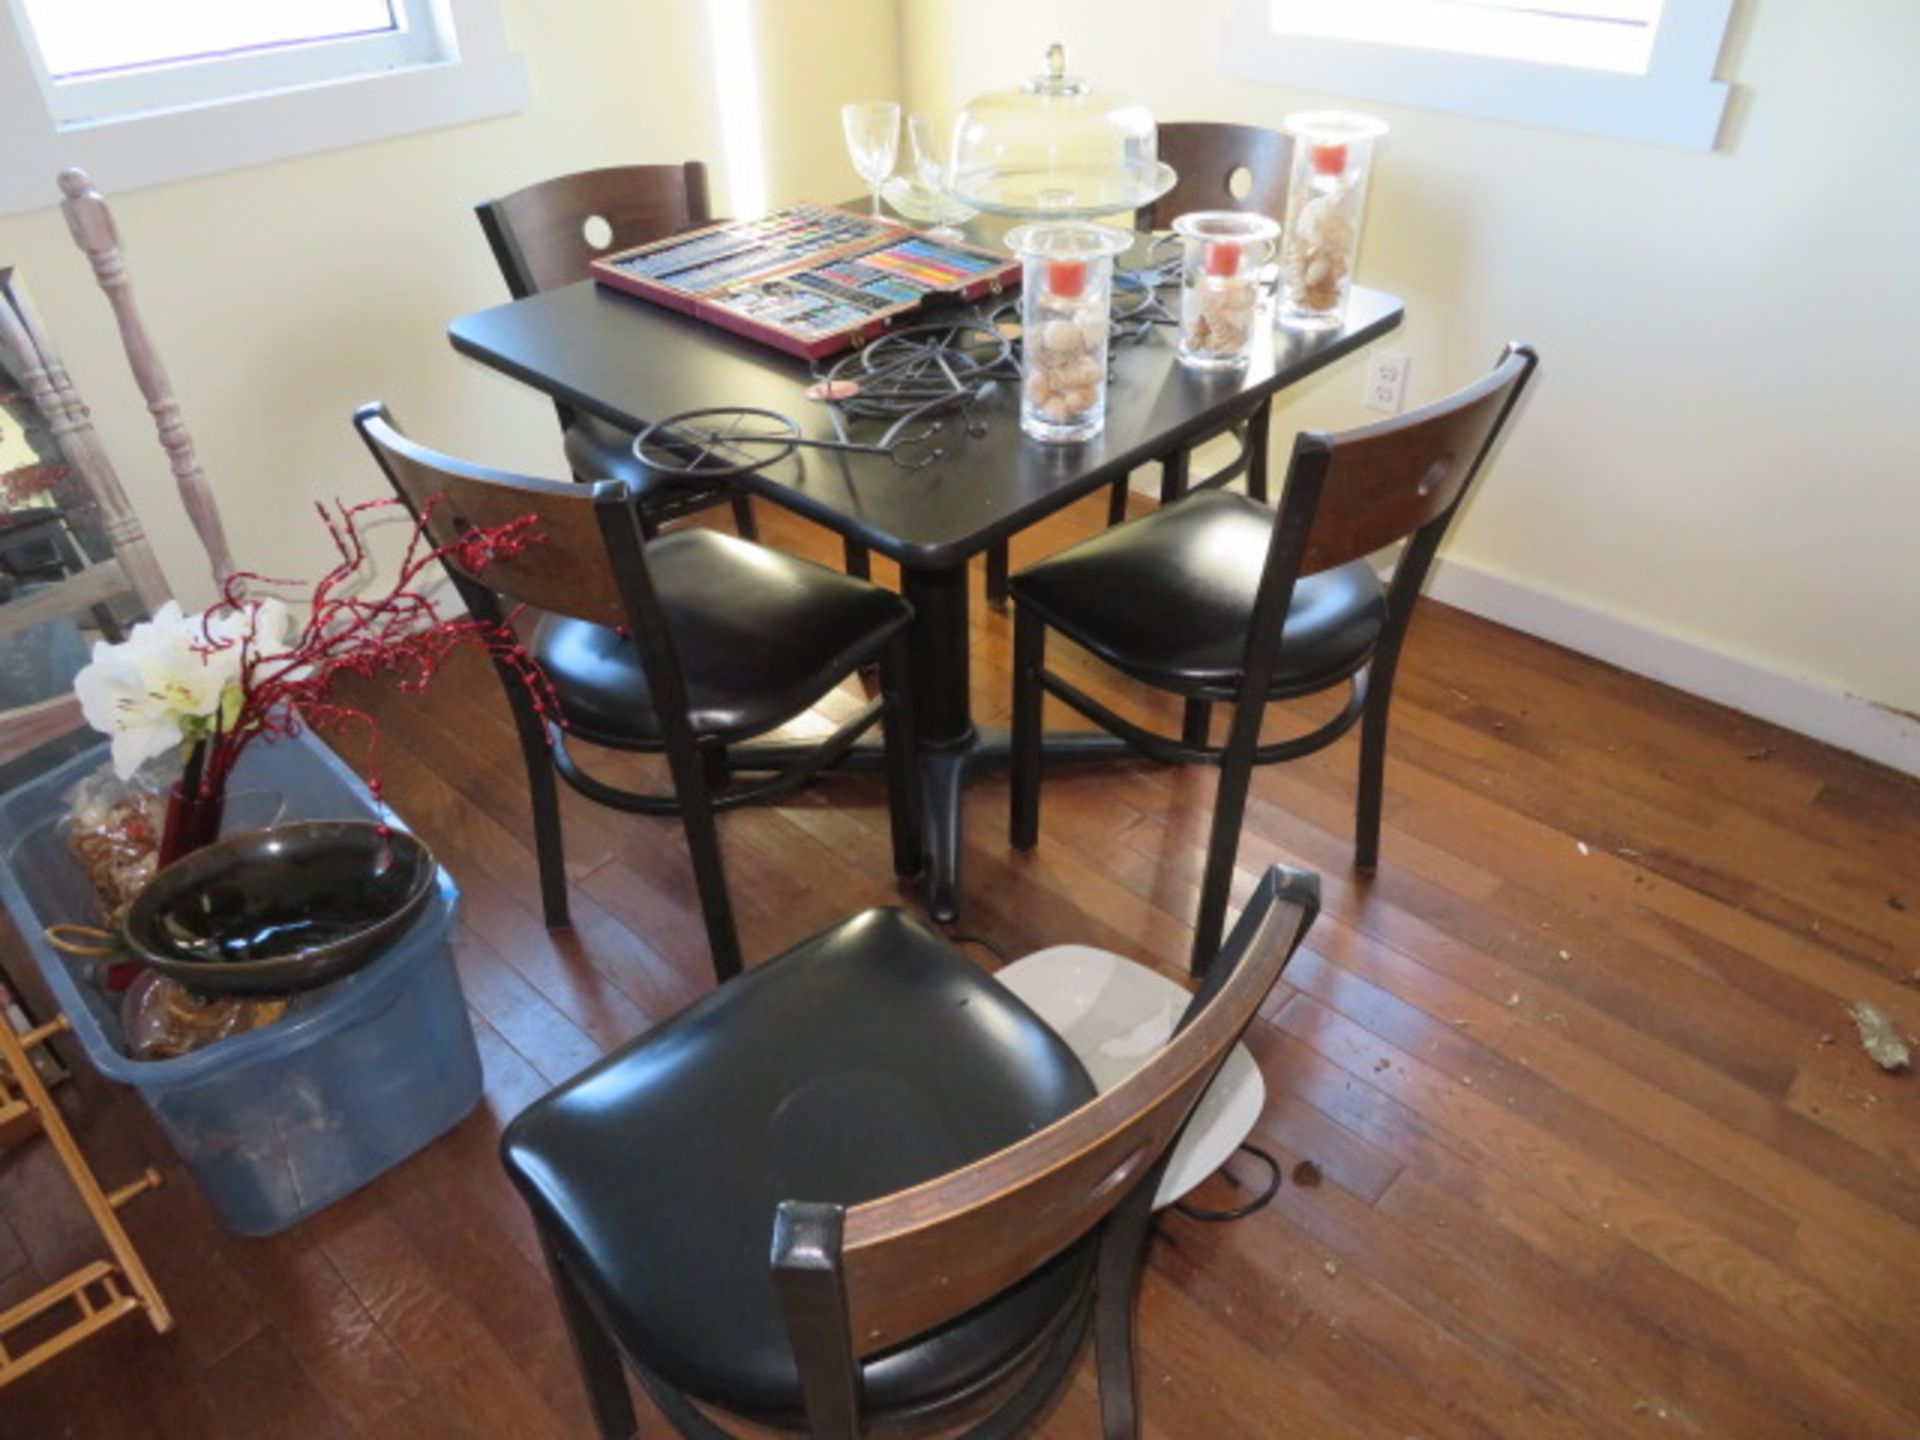 (3) 36" X 36" LAMINATE TOP TABLES 4-LEG SPIDER BASES (Located - Mays Landing, NJ) - Image 2 of 3